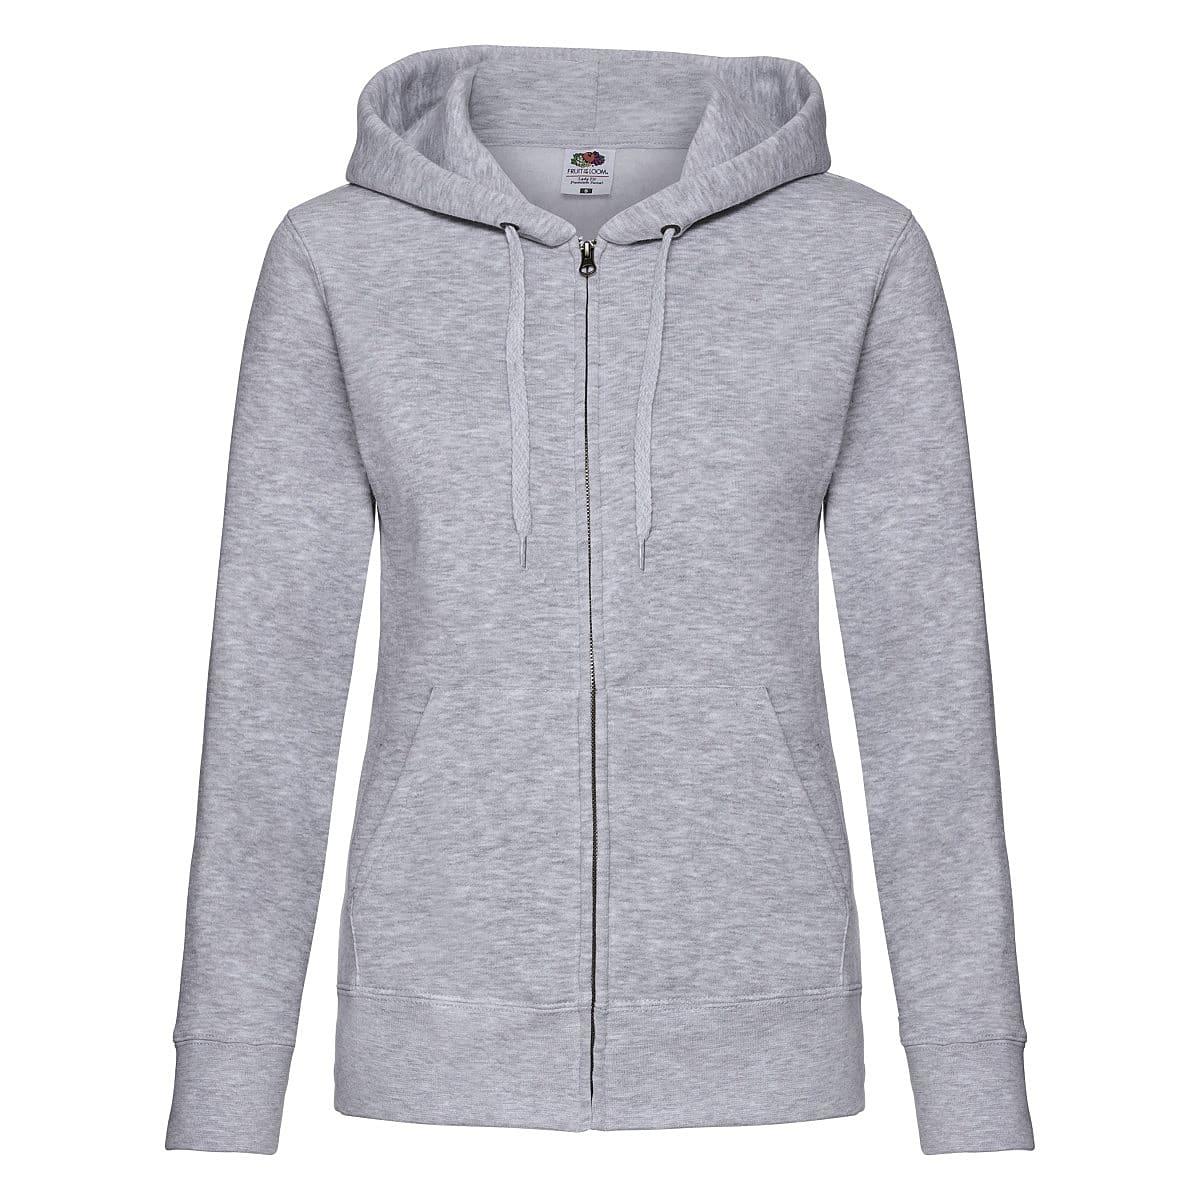 Fruit Of The Loom Lady-Fit Hoodie in Heather Grey (Product Code: 62118)